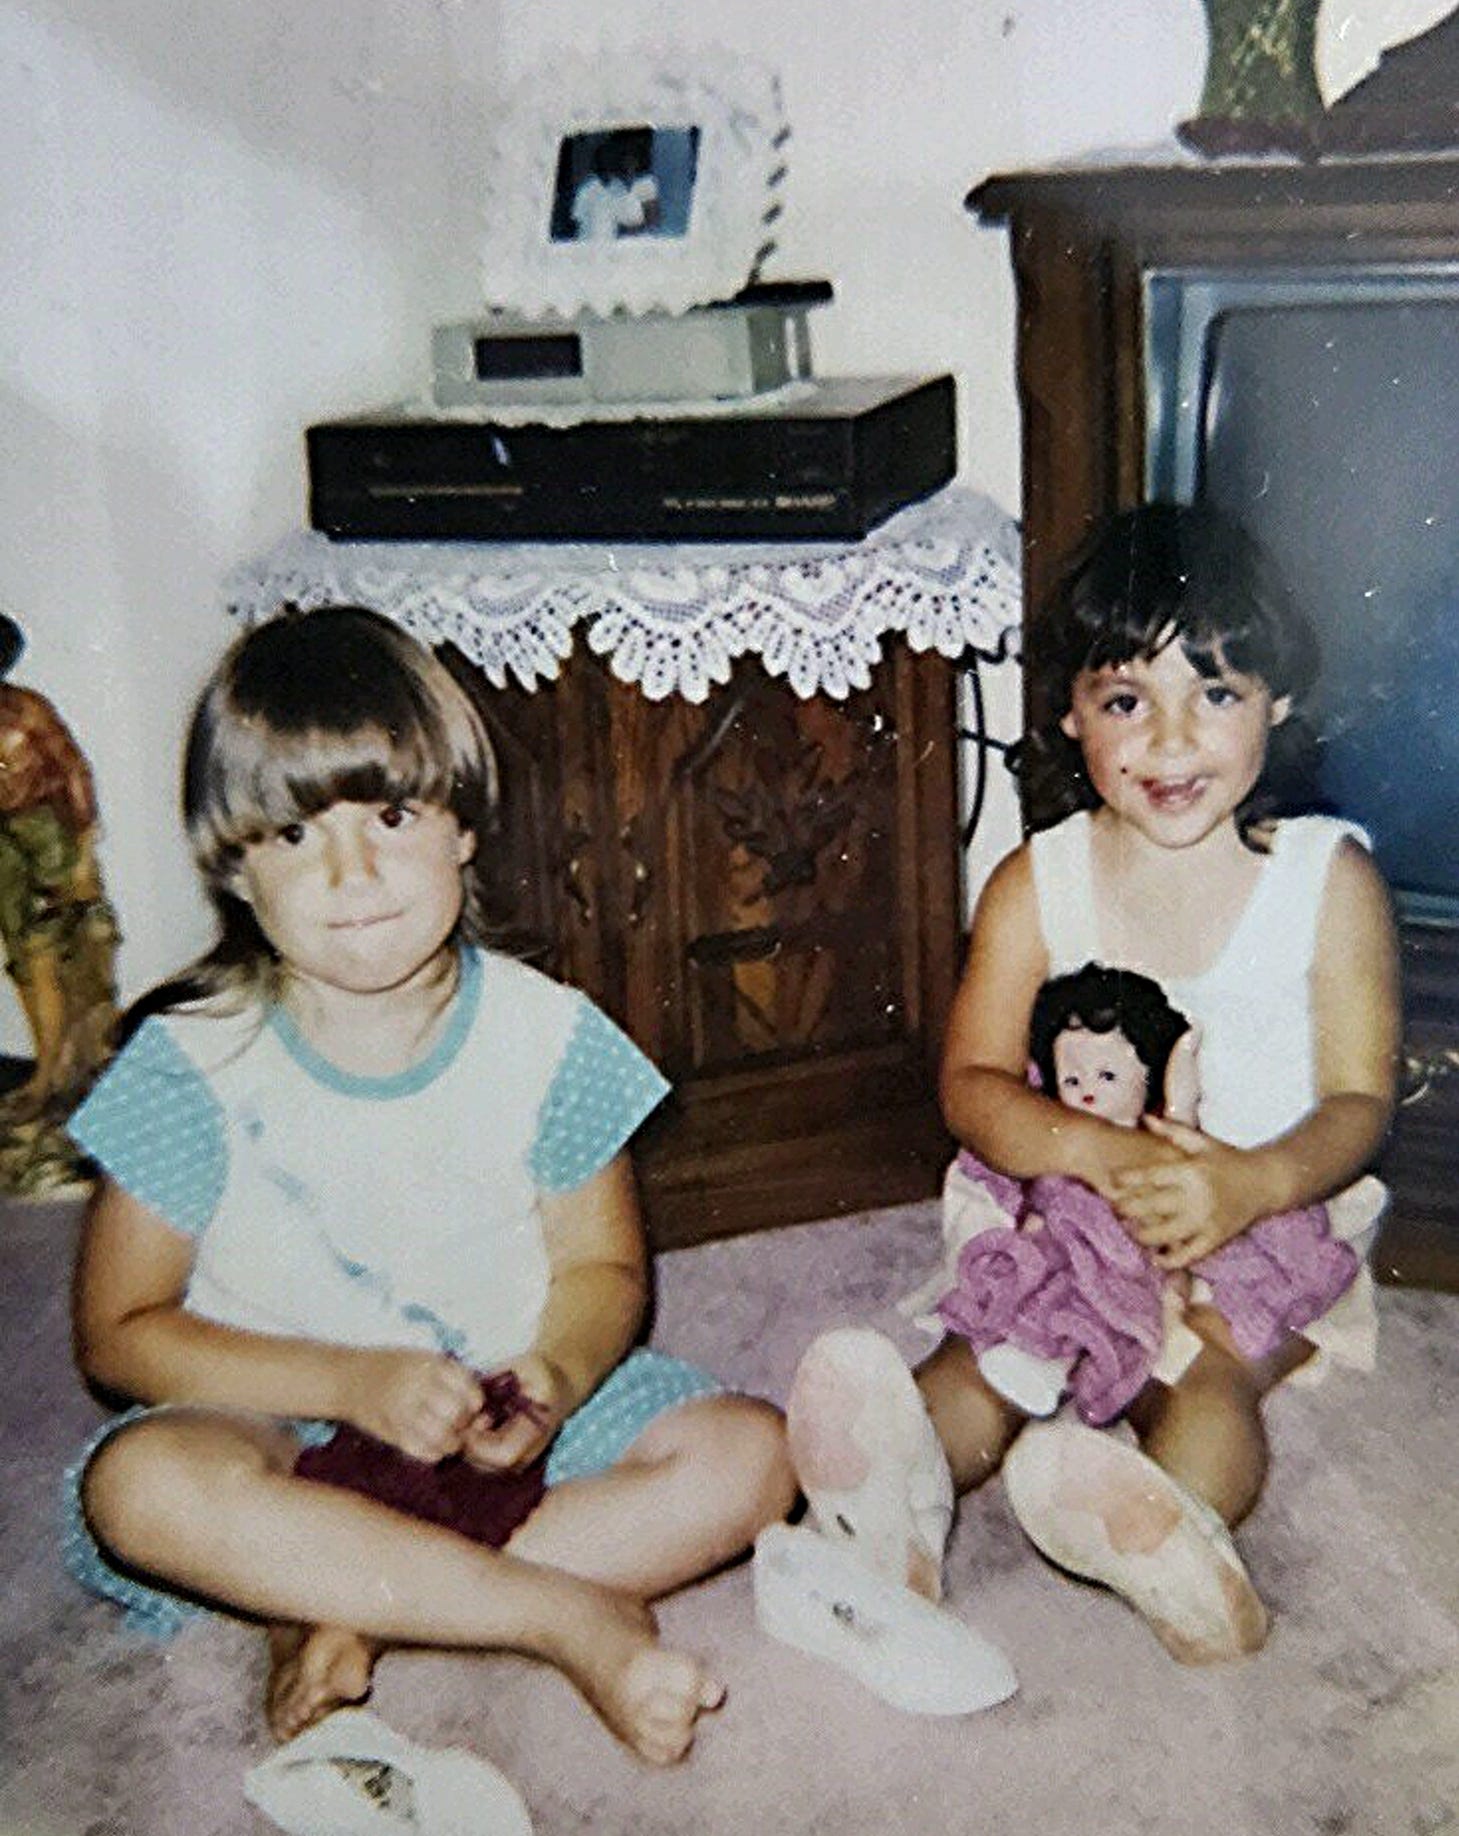 Angelica and Rosalie on their first day in a new foster home in 1993